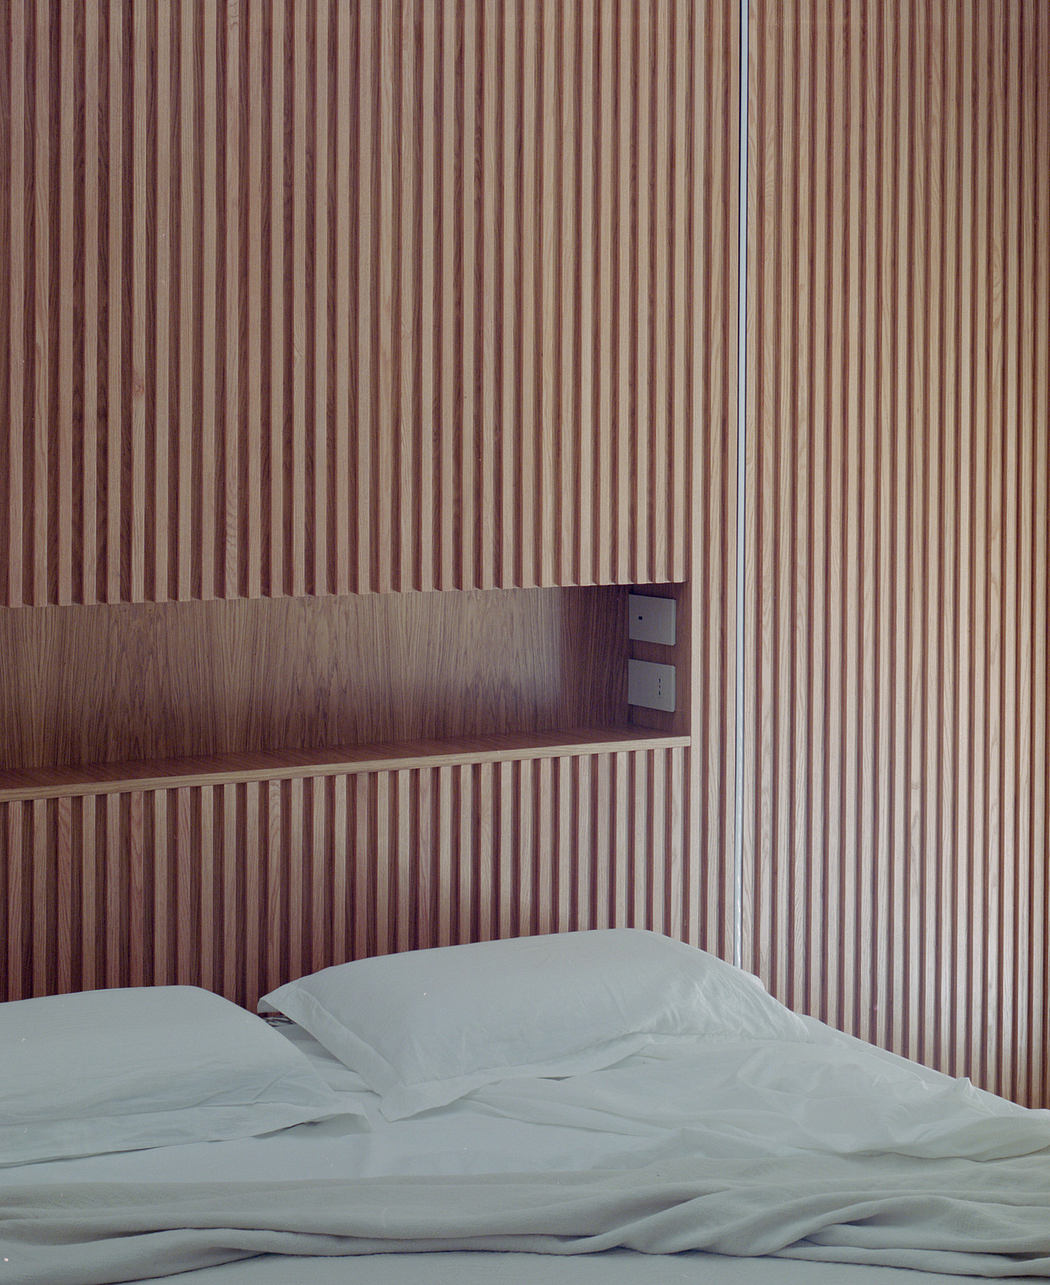 Modern bedroom with vertical wood paneling and unmade bed.